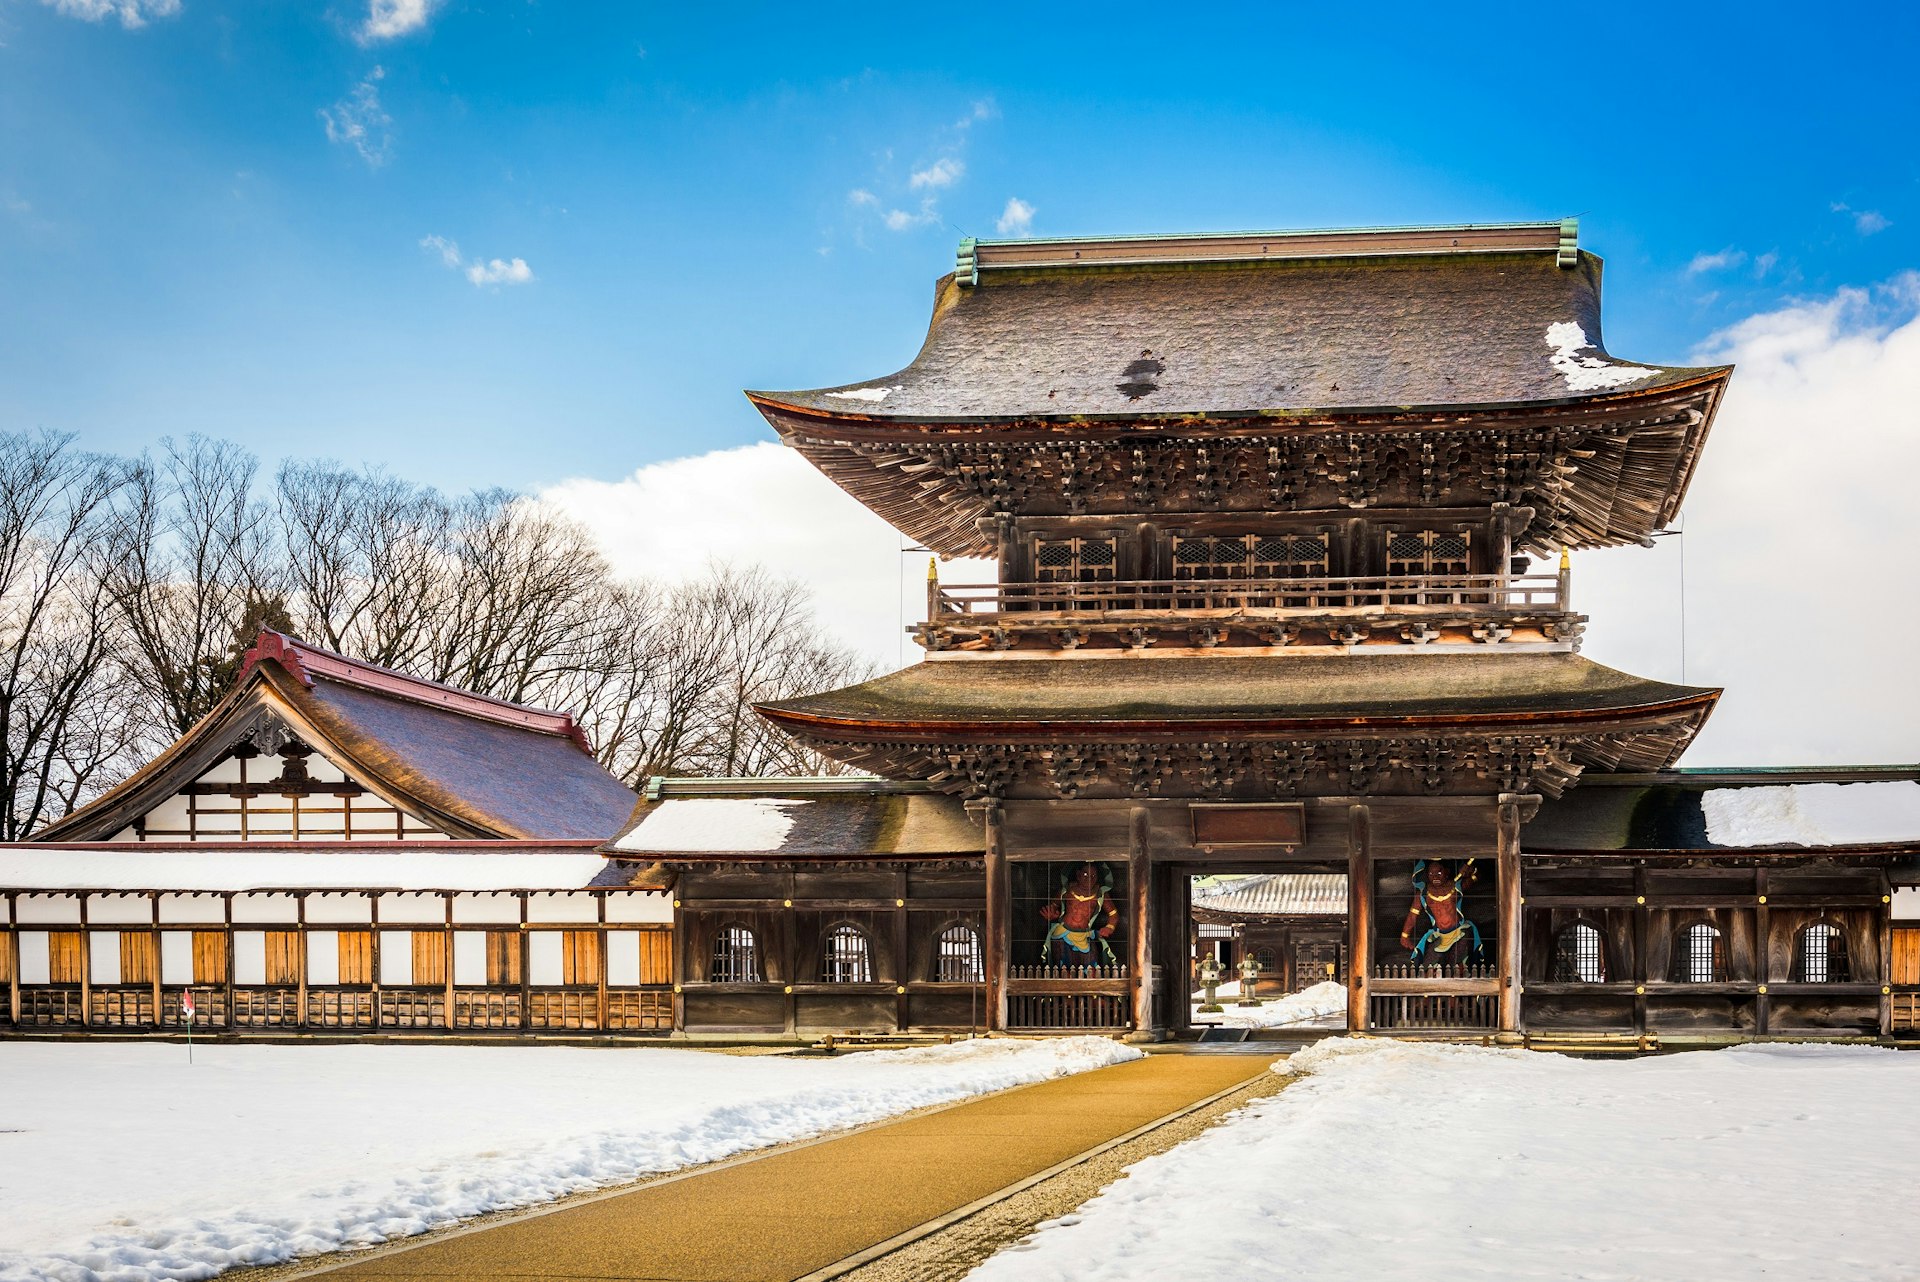 A tall and large wooden temple, with a traditional Japanese slanting roof. The ground around the temple is covered in snow.